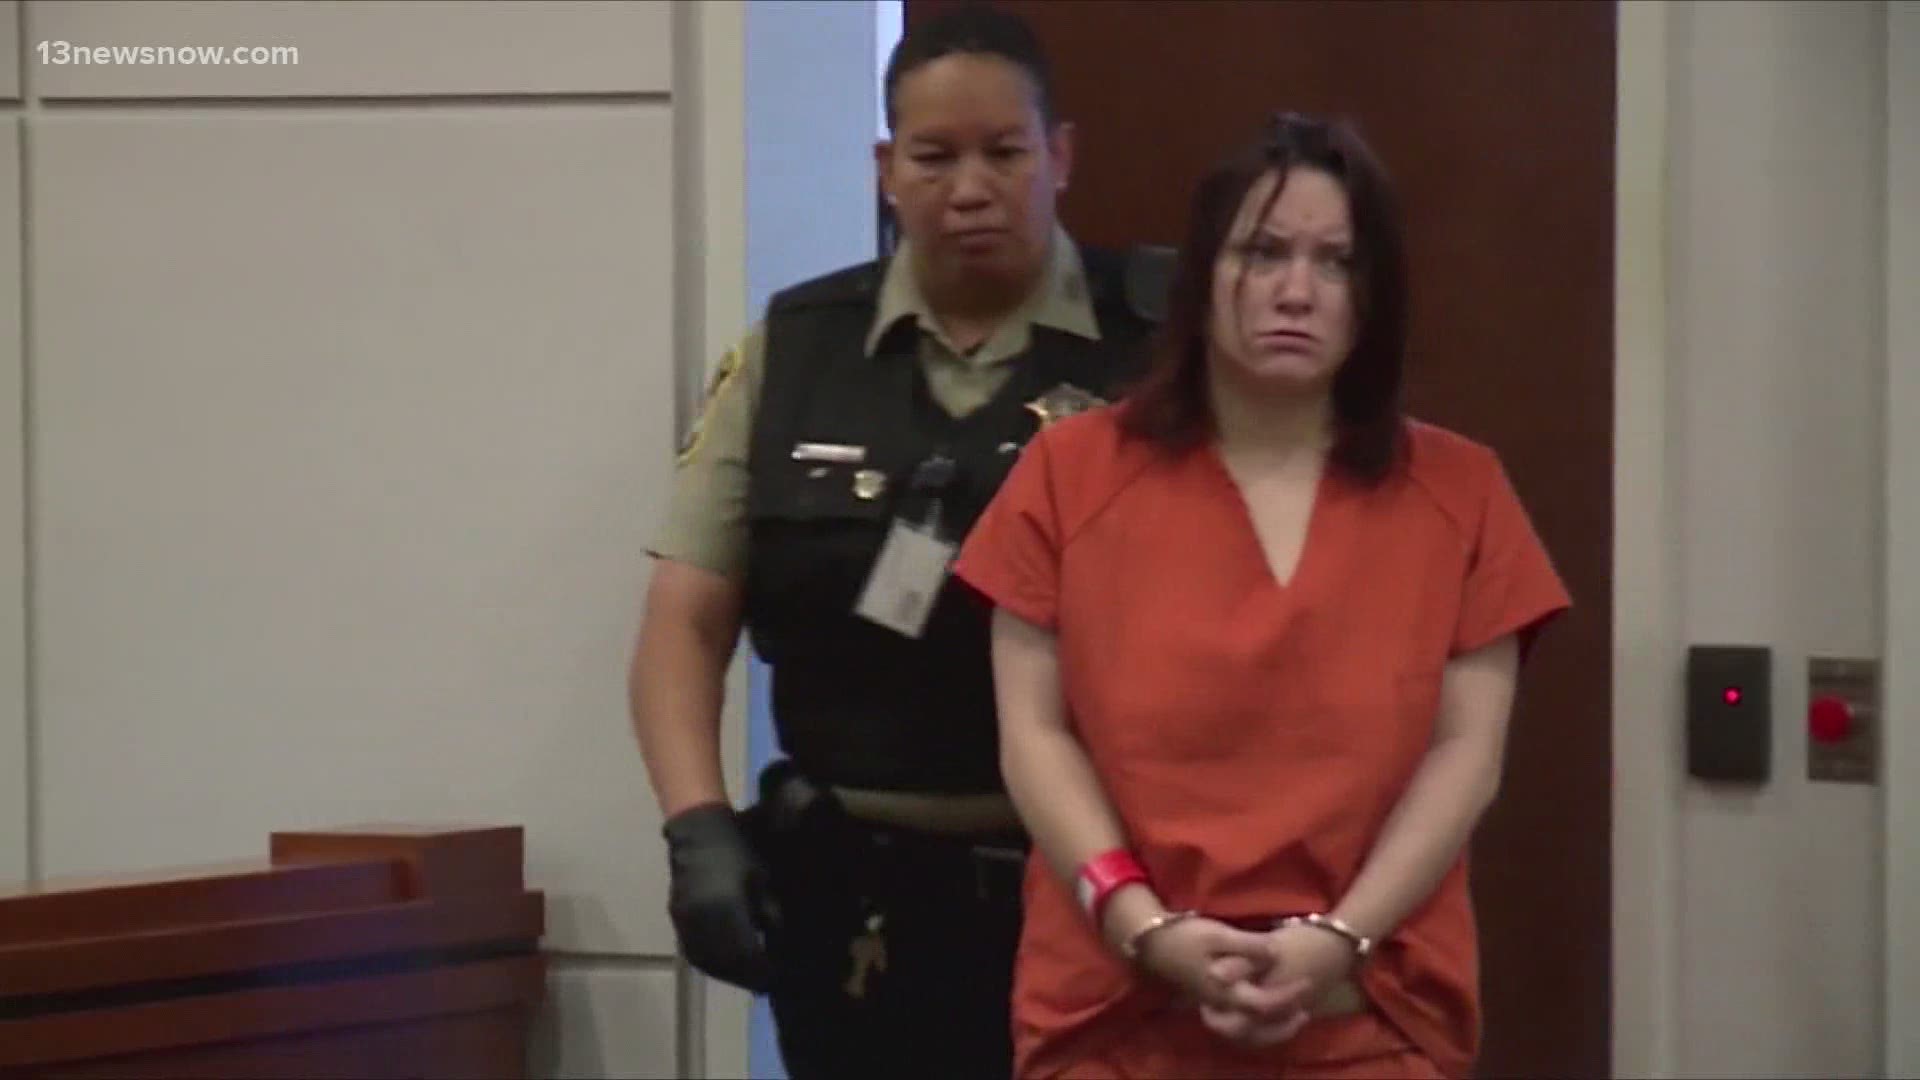 Julia Tomlin, the woman accused of murdering her two-year-old son, Noah, won't be released from jail as she awaits her trial which will be in April 2021.